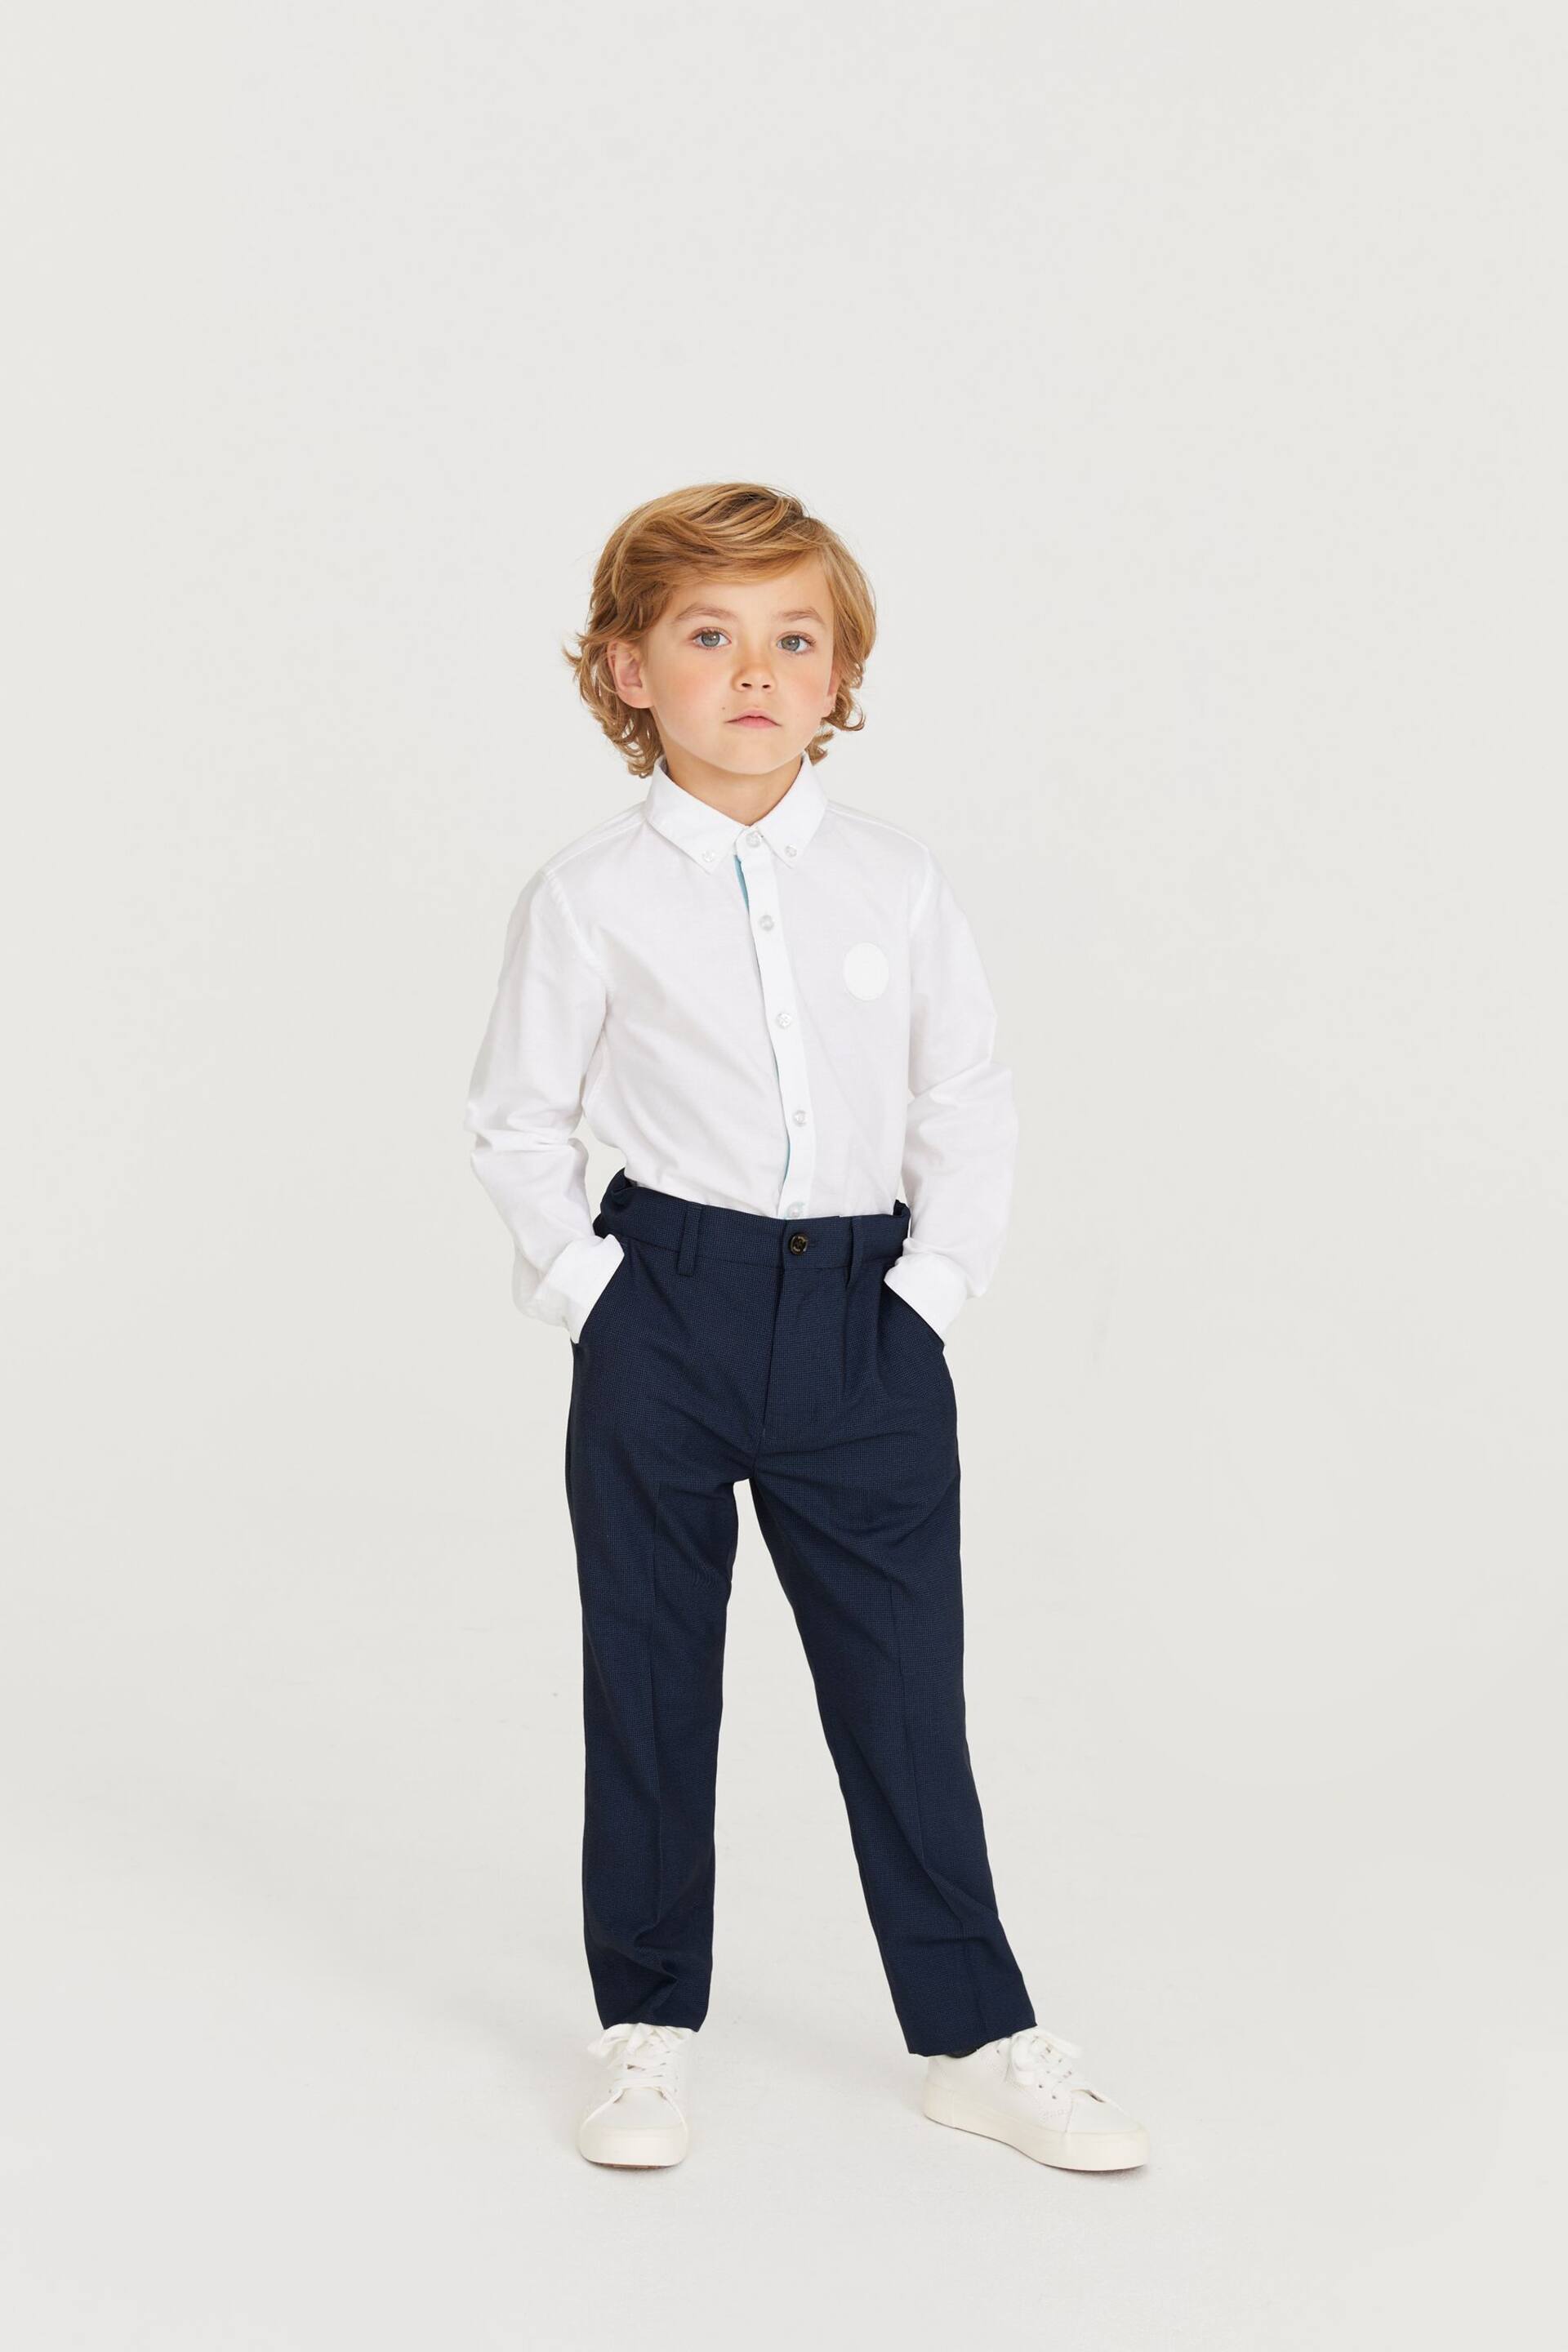 Baker by Ted Baker Suit Trousers - Image 1 of 5